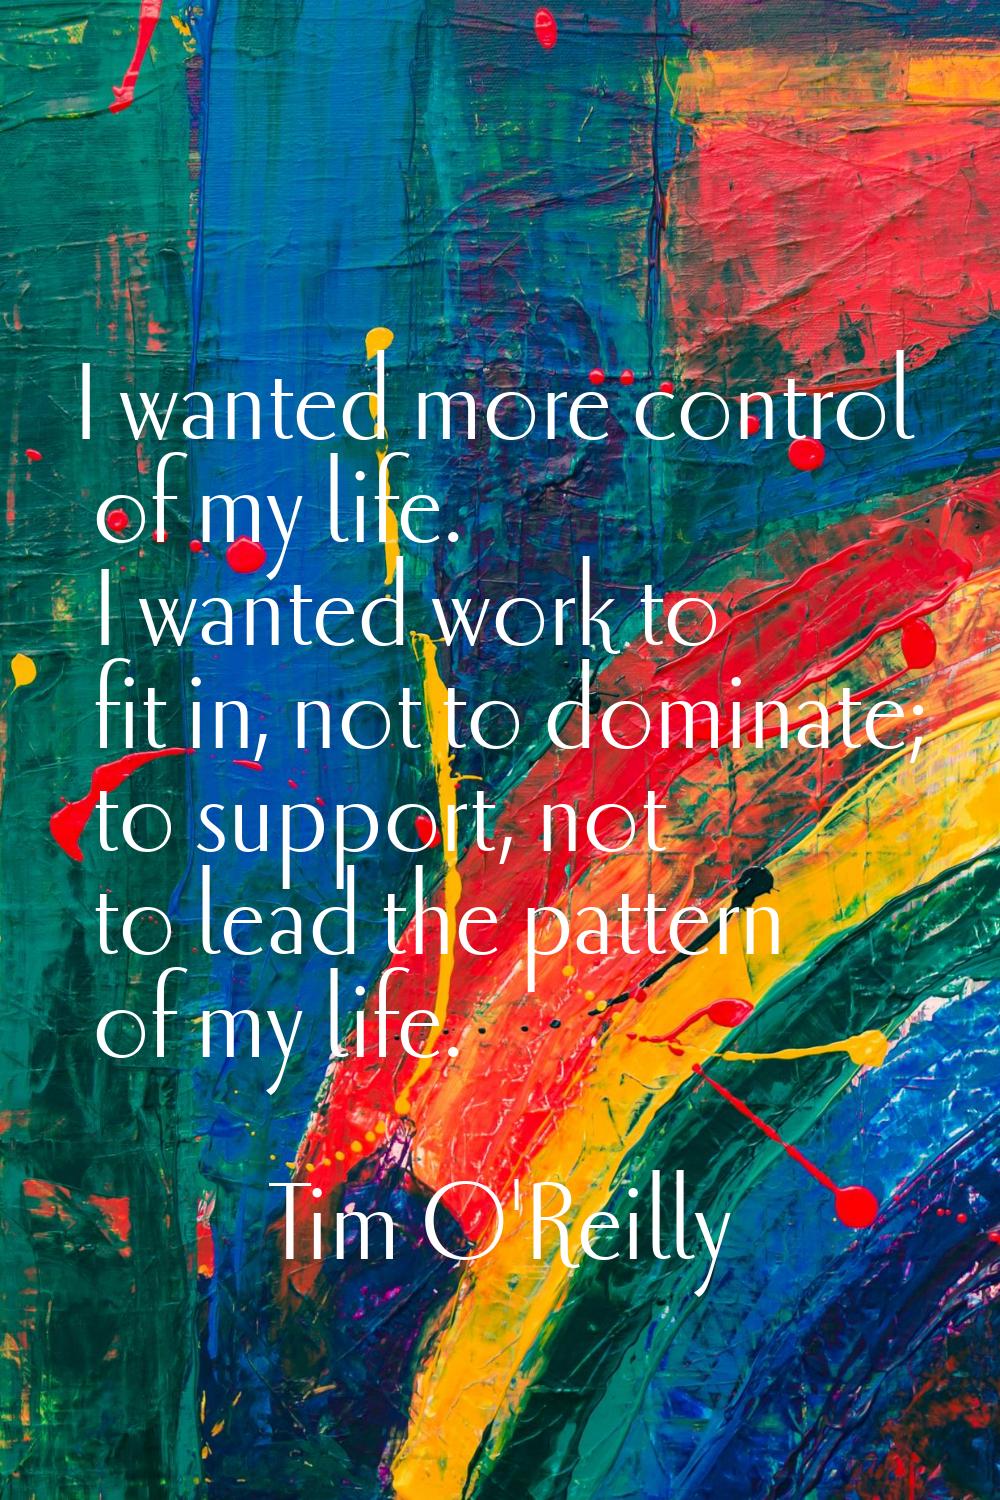 I wanted more control of my life. I wanted work to fit in, not to dominate; to support, not to lead